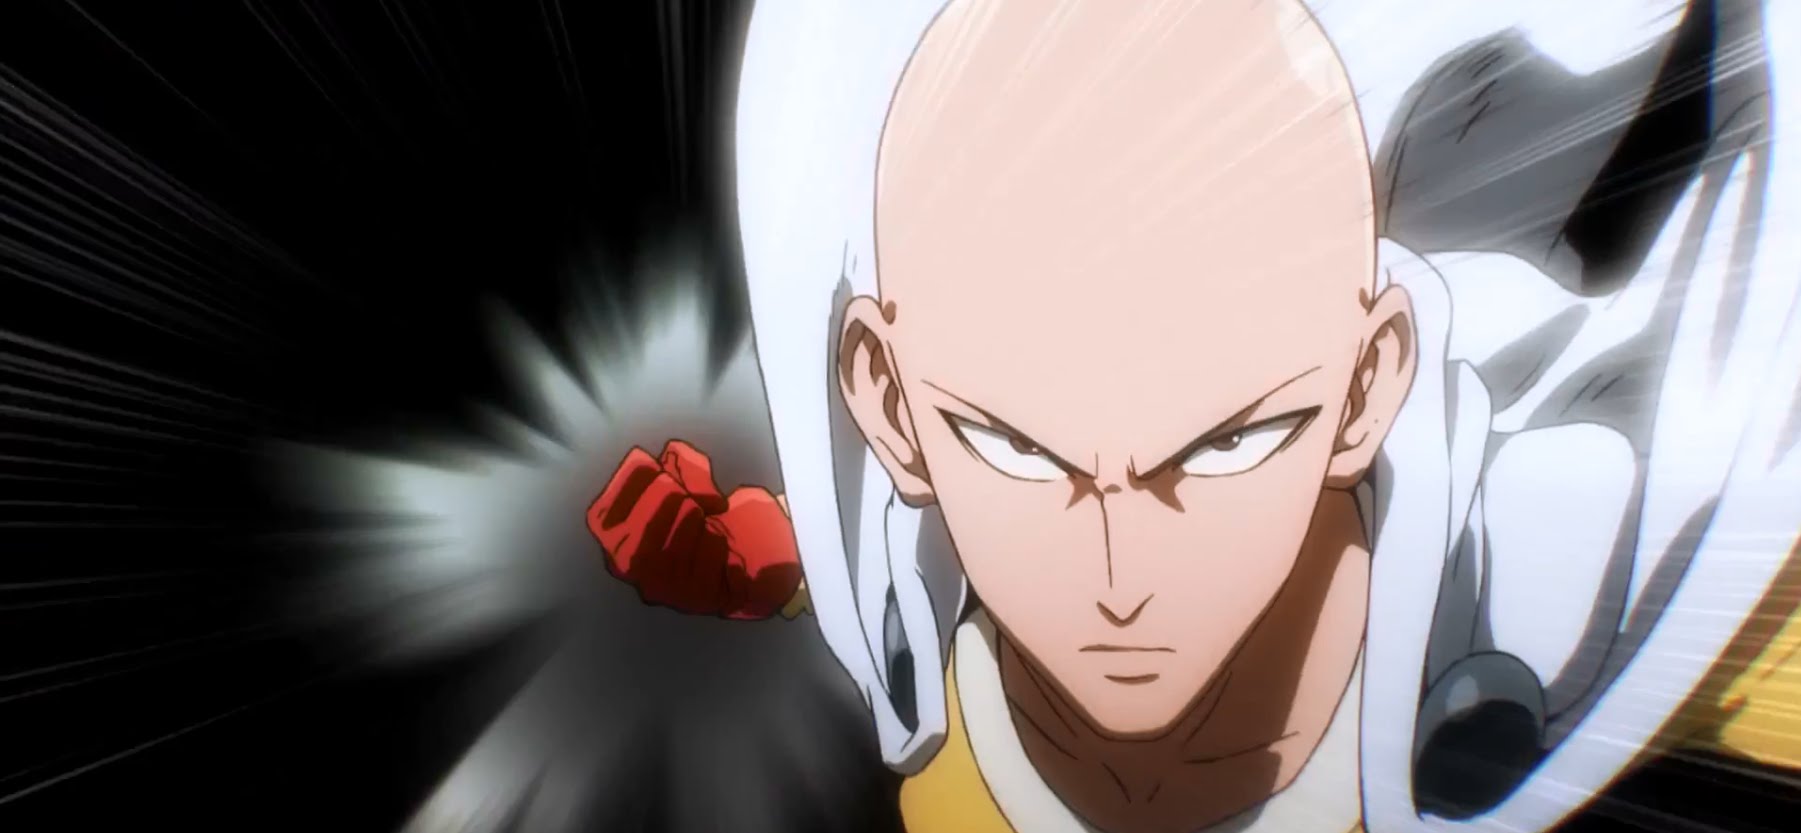 New Visual Key And Trailer For One Punch Man Is Out The Hyped Geek